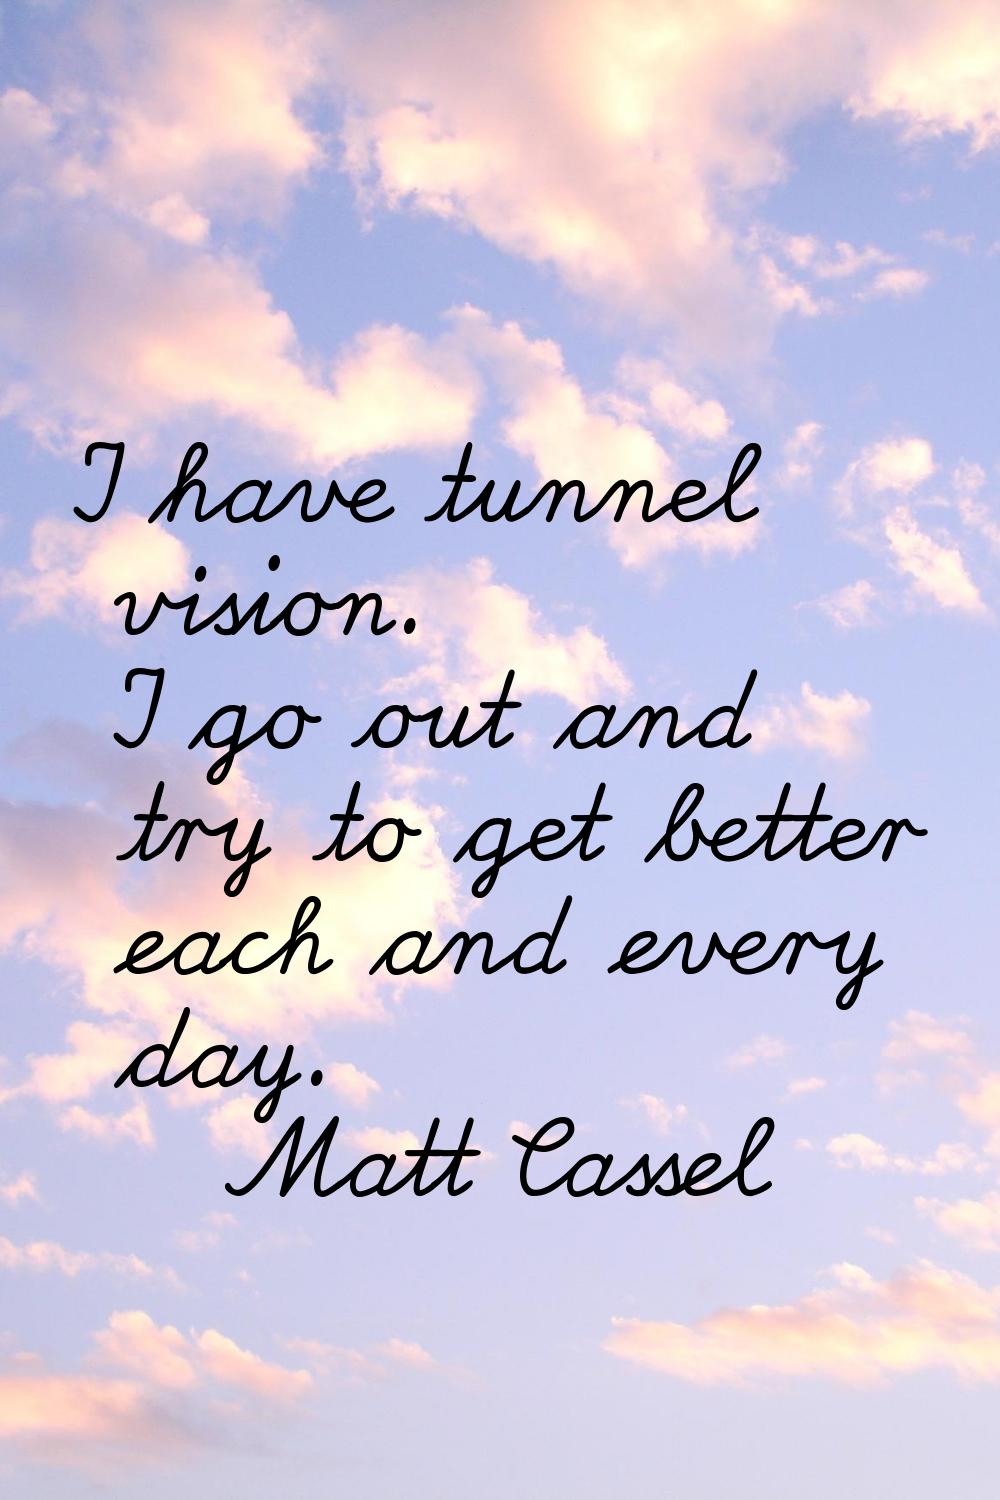 I have tunnel vision. I go out and try to get better each and every day.